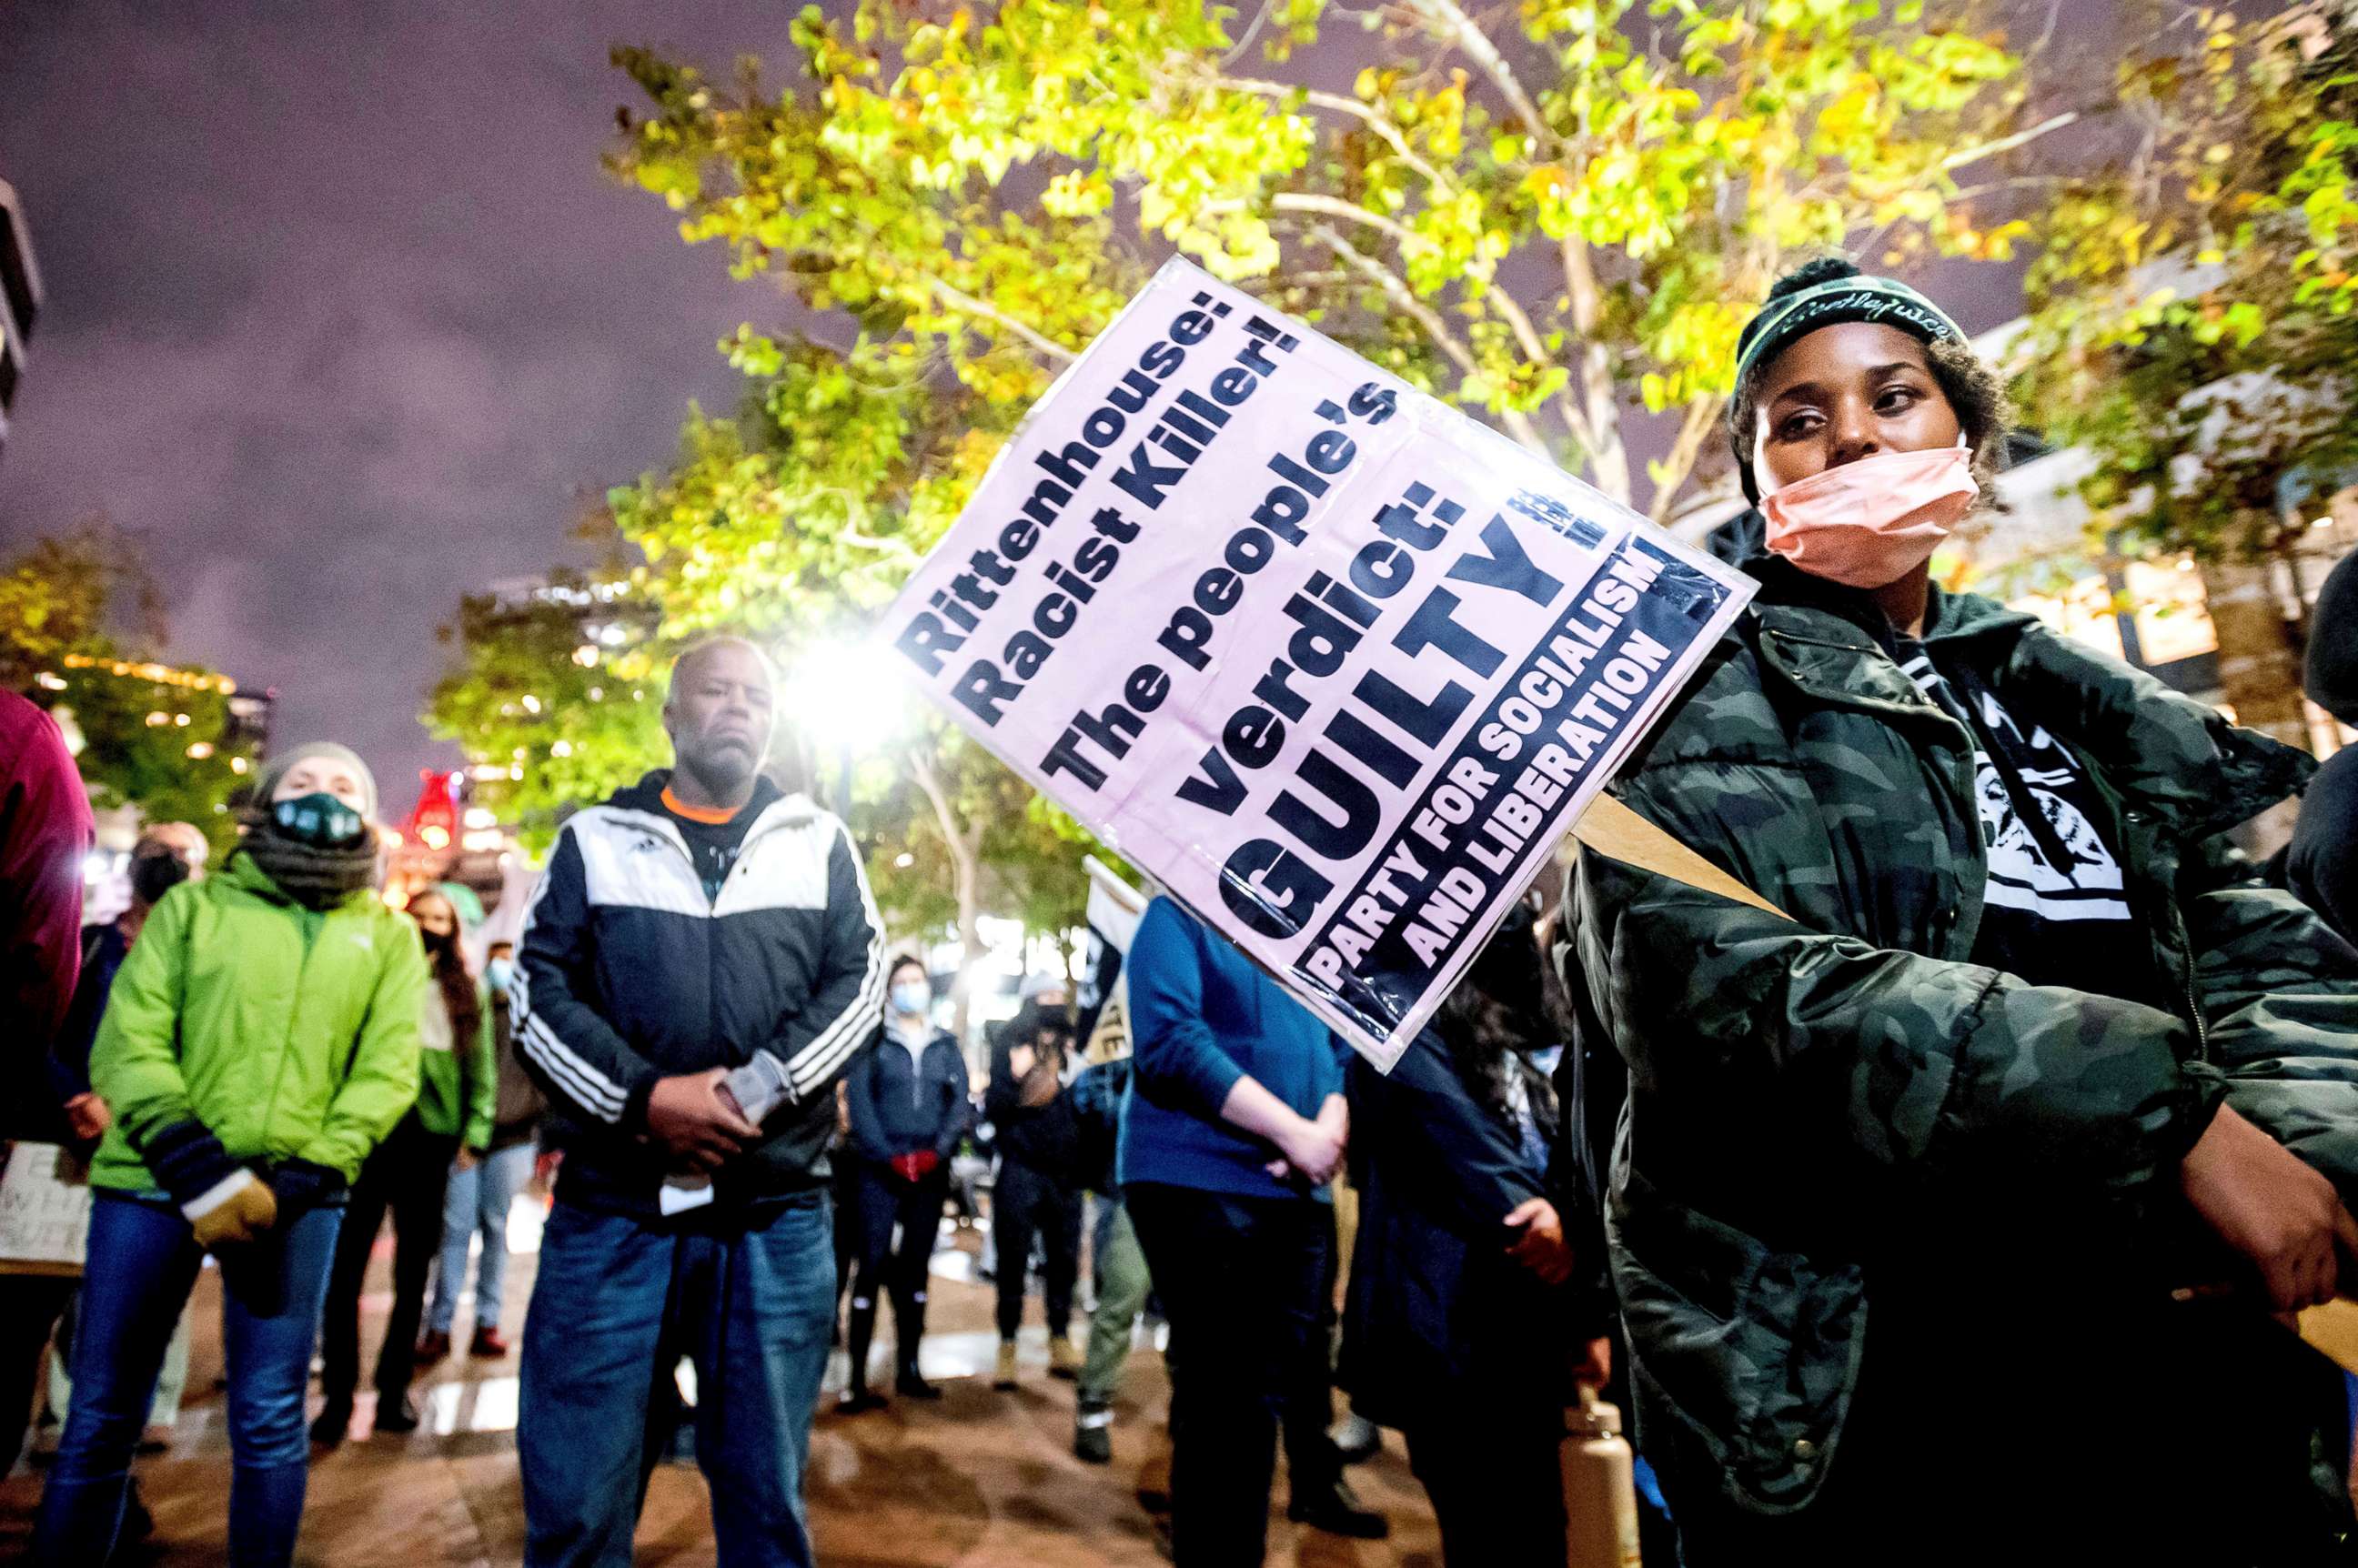 PHOTO: Bria Swenson holds a sign during a demonstration, Nov. 19, 2021, in Oakland, Calif., following the acquittal of Kyle Rittenhouse in Kenosha, Wis.